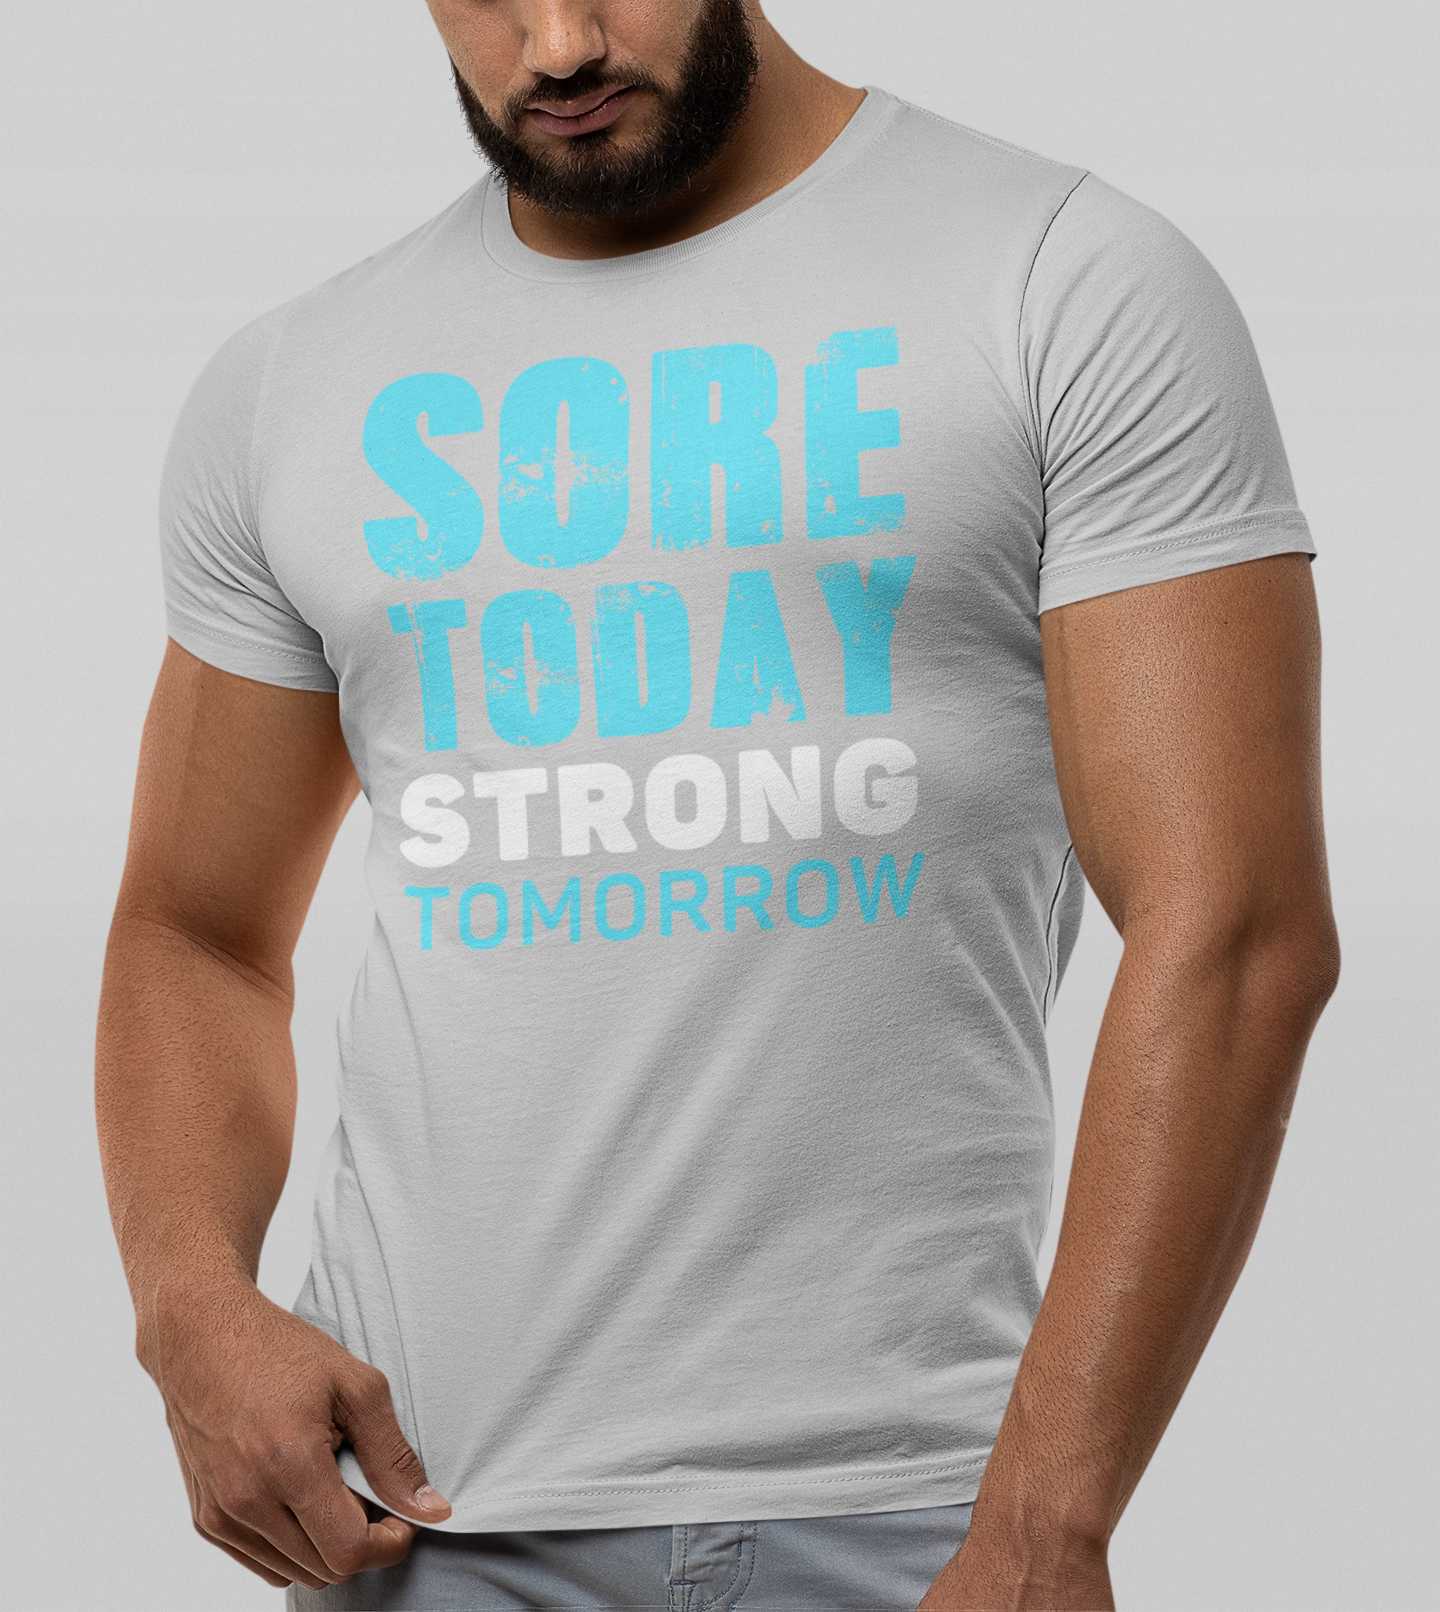 Sore Today Strong Tomorrow - Gym T-Shirt Strong Soul Shirts & Tops